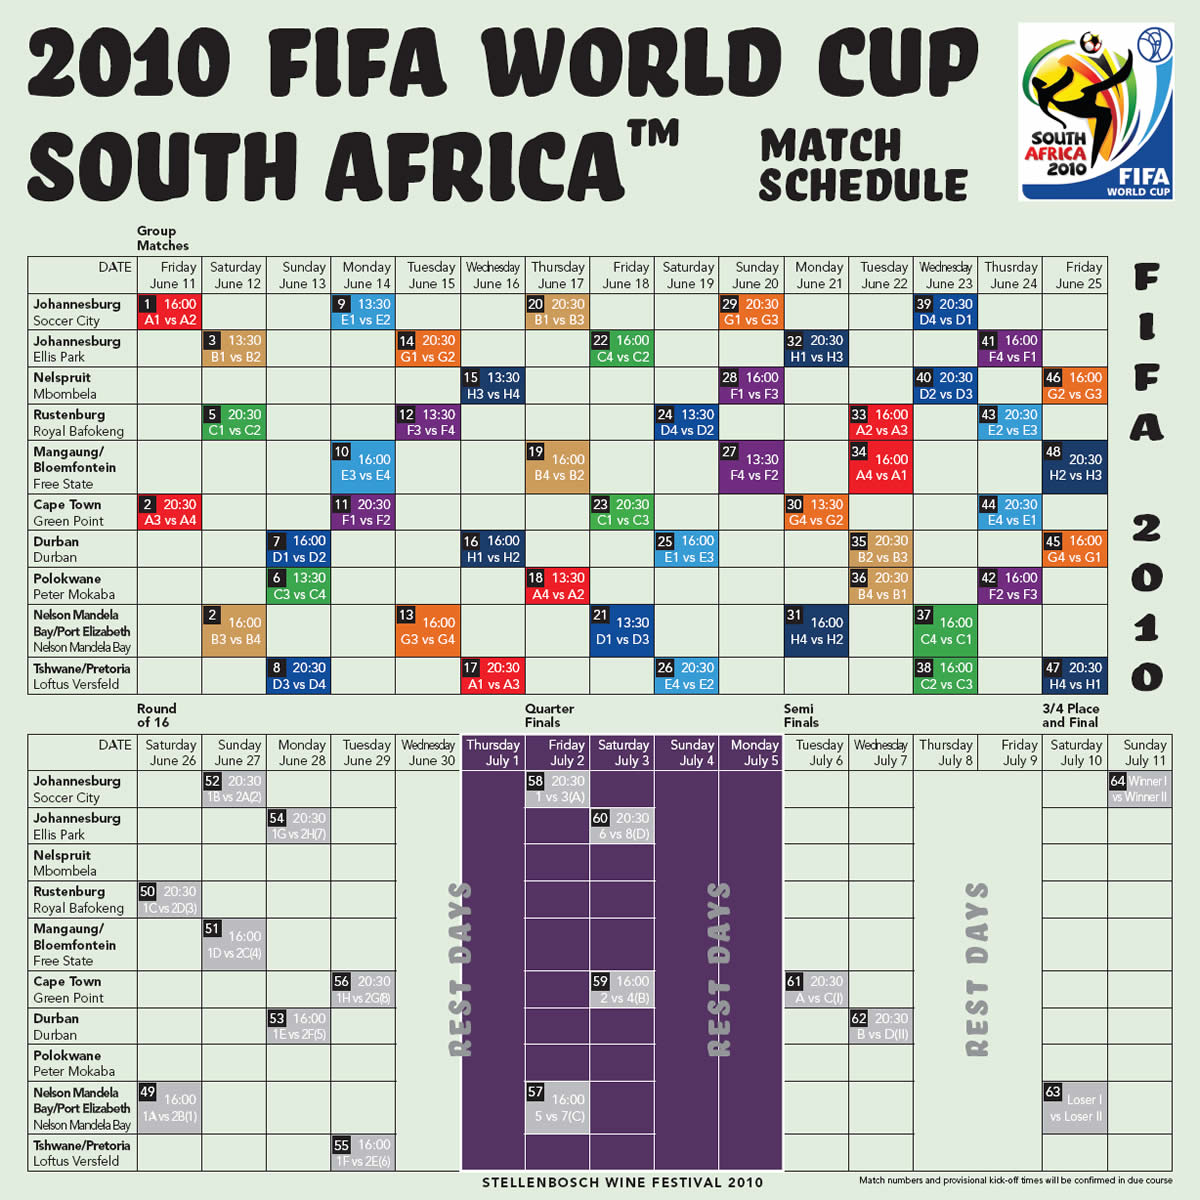 South Africa ::South Africa 2010 World Cup Soccer: 2010 FIFA WORLD CUP MATCH SCHEDULE